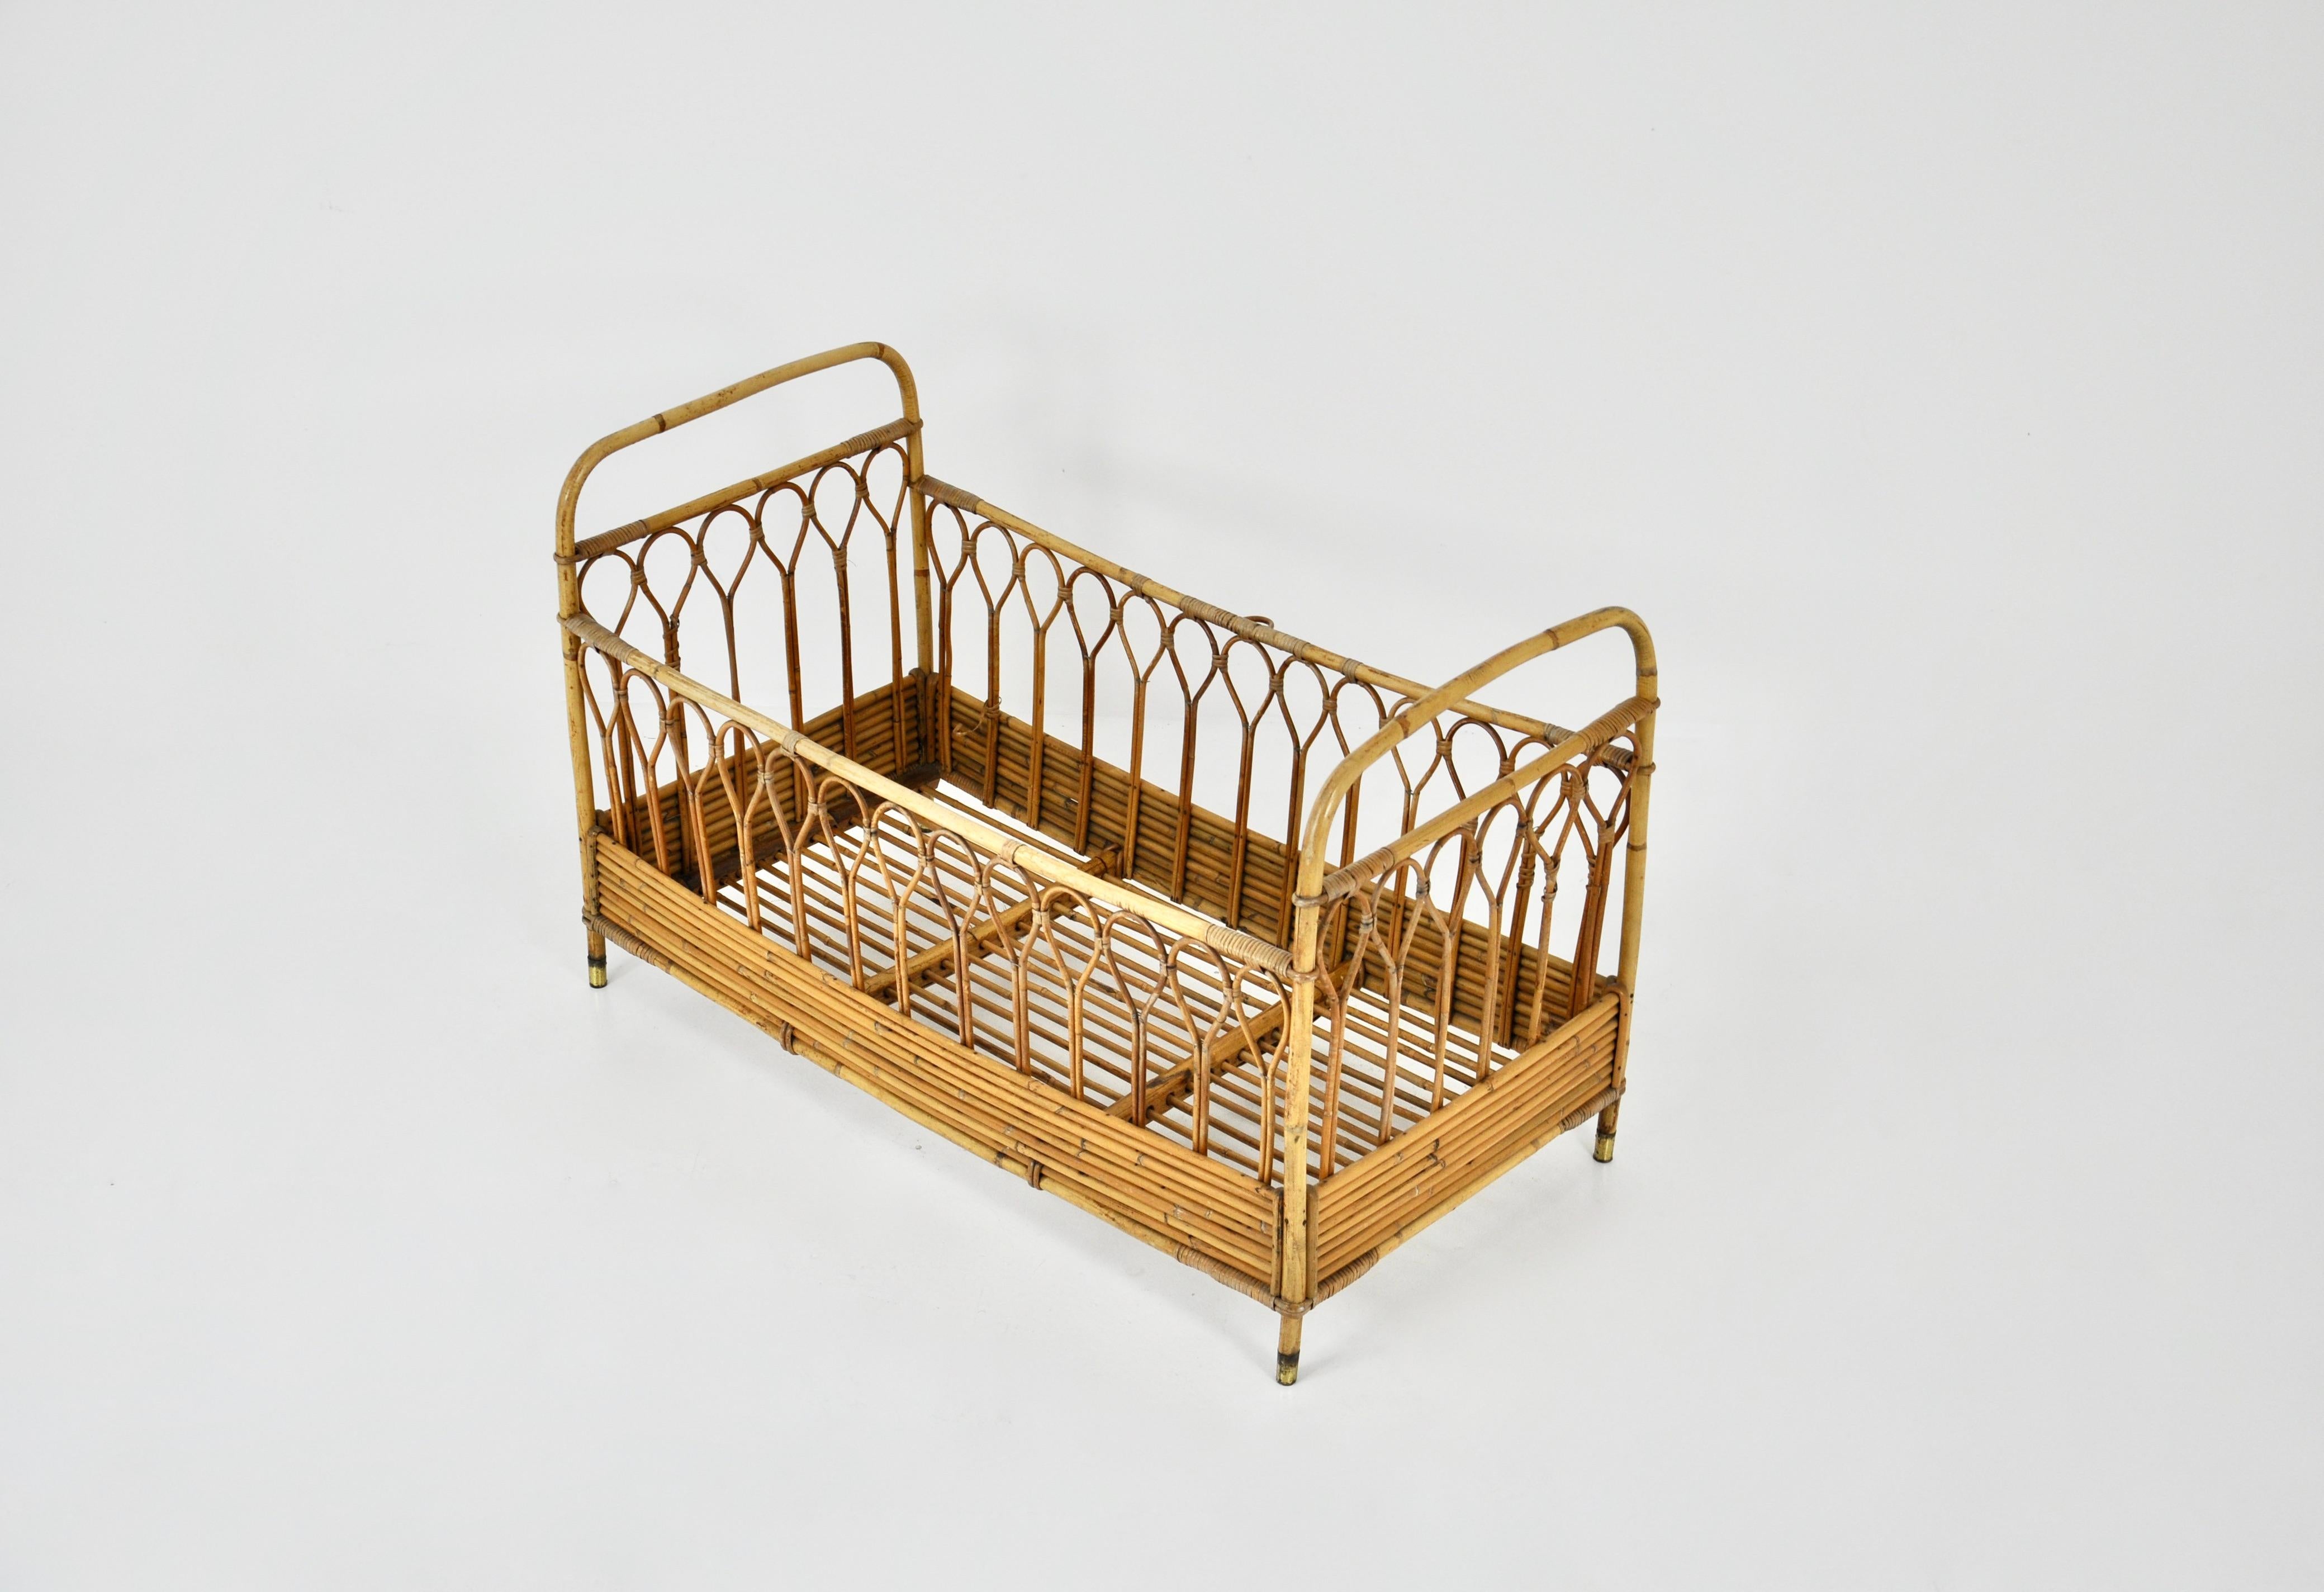 jenny lind crib from 1980s